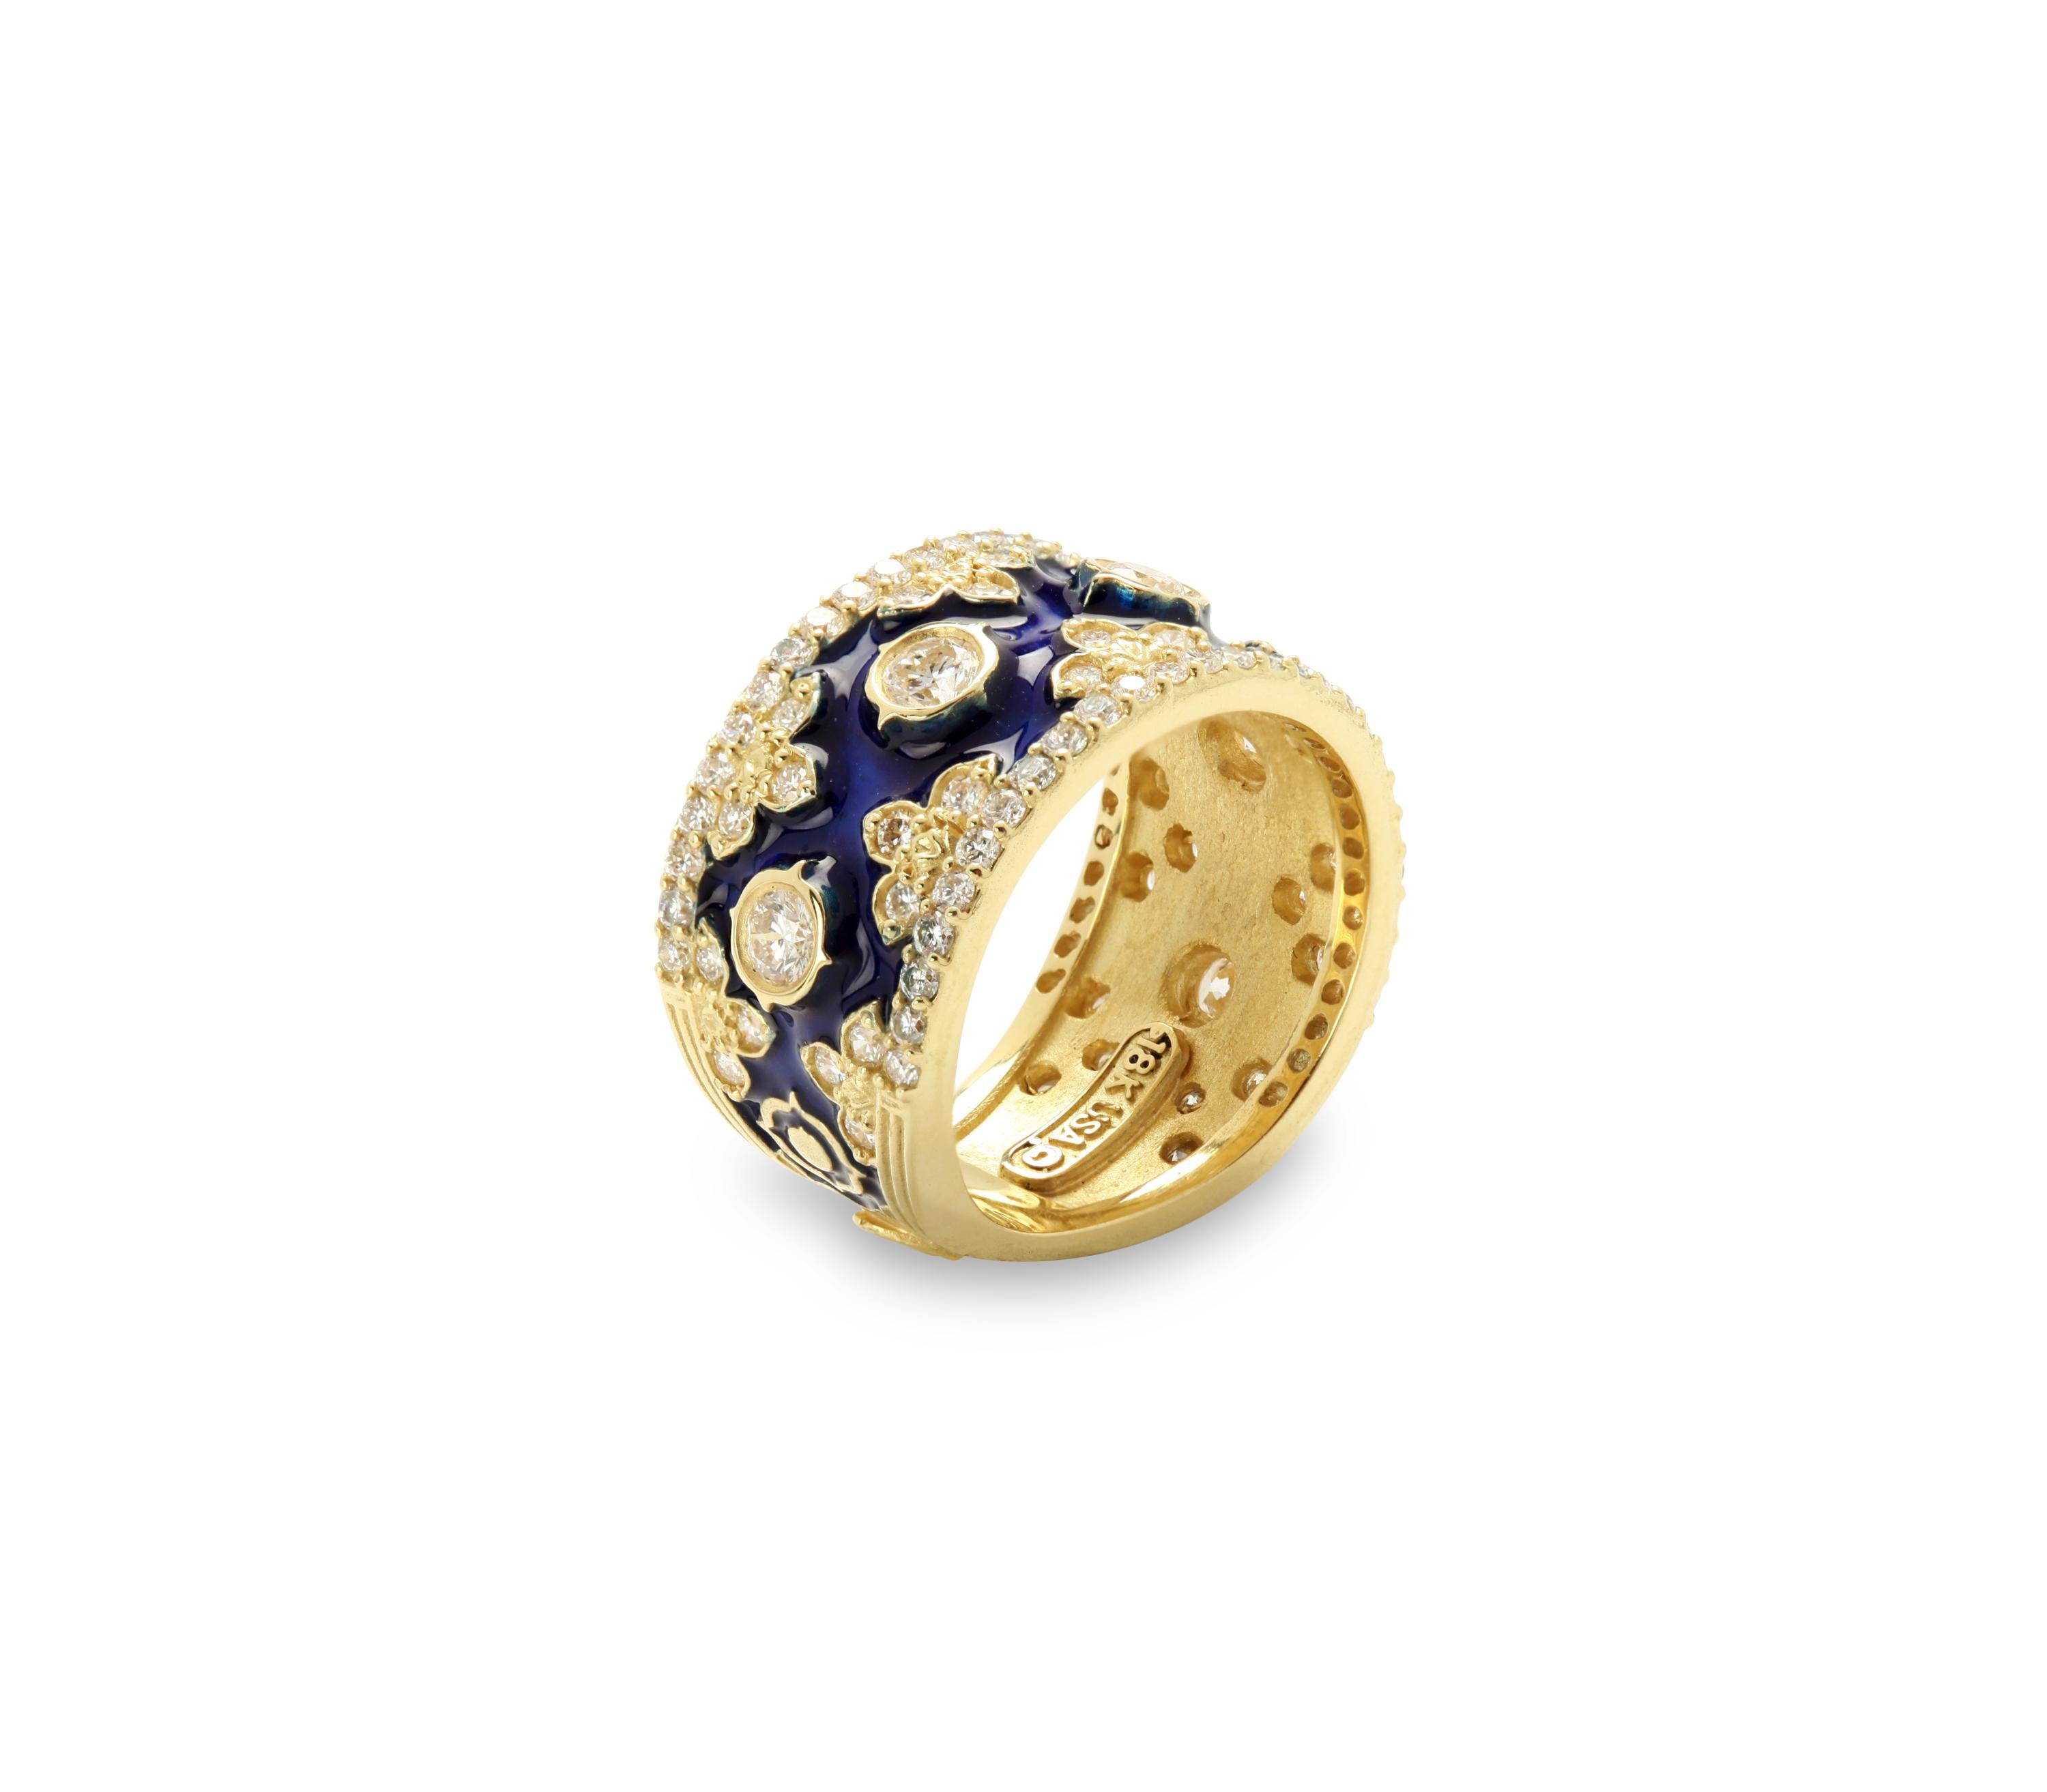 Women's Stambolian Yellow Gold and Diamond Band Ring with Cobalt Blue Enamel